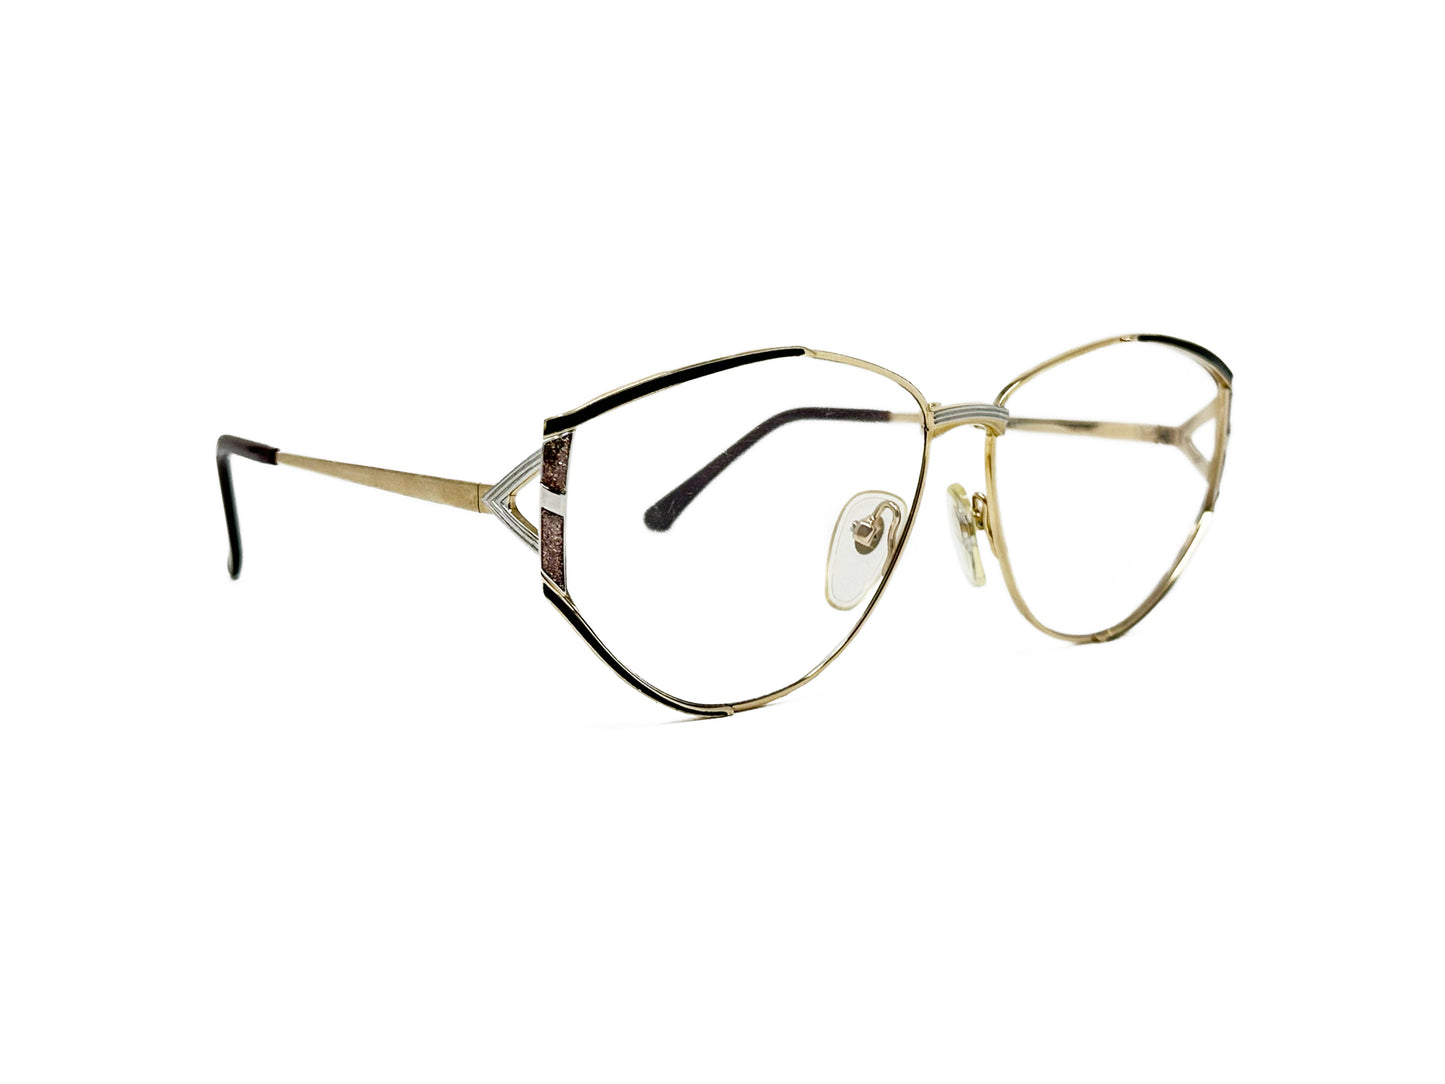 Donna House oversized, angular, metal optical frame with rounded bottom. Model: 4001. Color: 01 - Light Gold with black corners and silver metal accents. Side view.